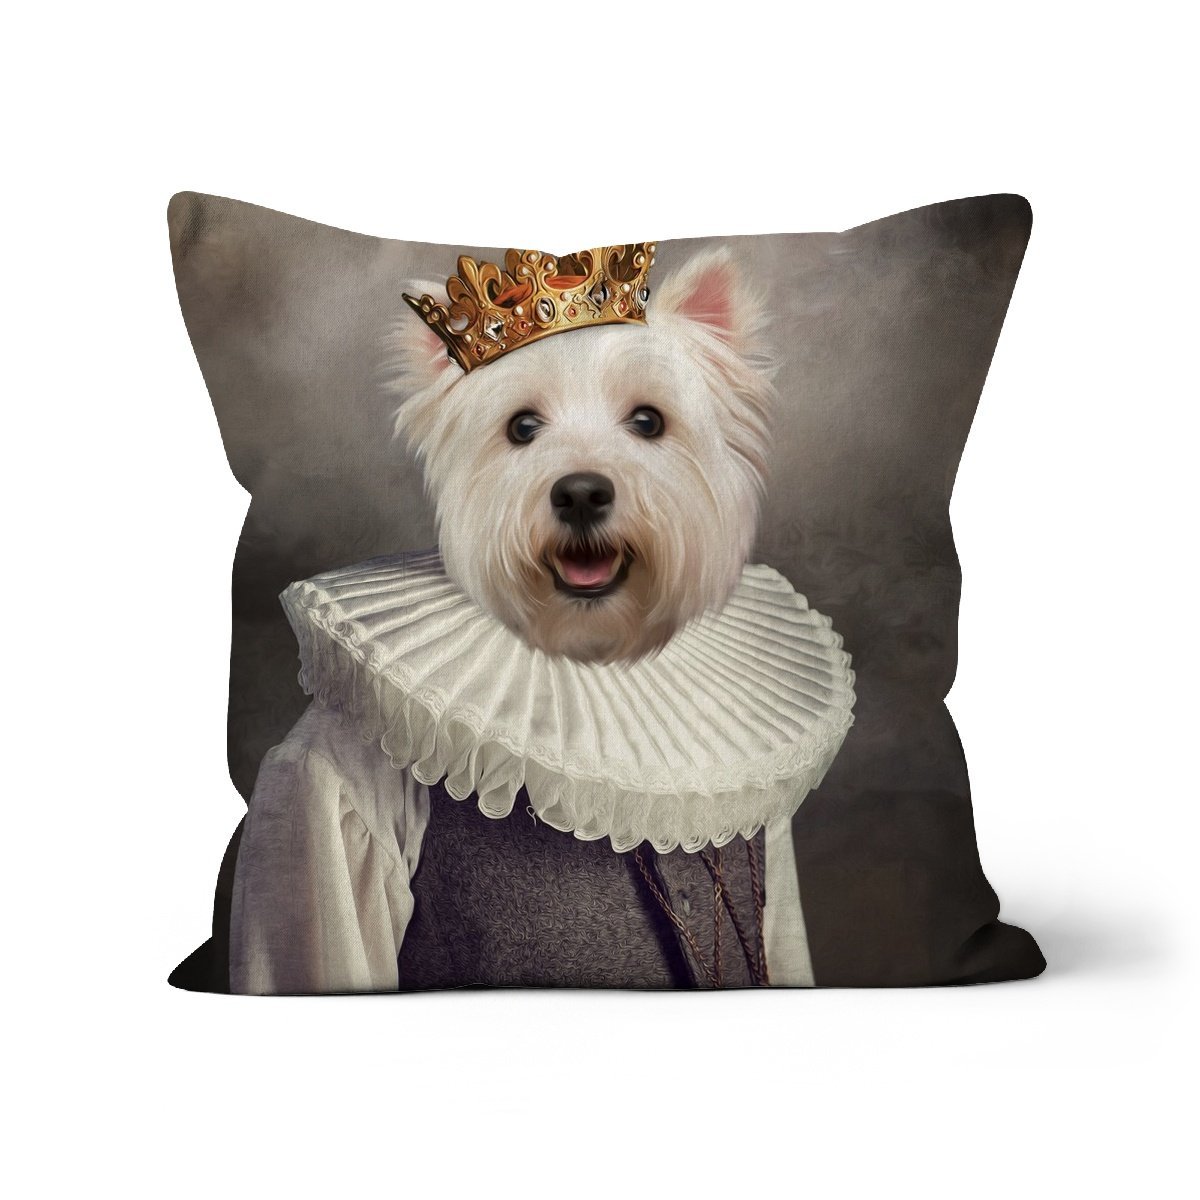 The Young Prince: Custom Pet Cushion - Paw & Glory - #pet portraits# - #dog portraits# - #pet portraits uk#paw & glory, custom pet portrait pillow,personalised cat pillow, dog shaped pillows, custom pillow cover, pillows with dogs picture, my pet pillow